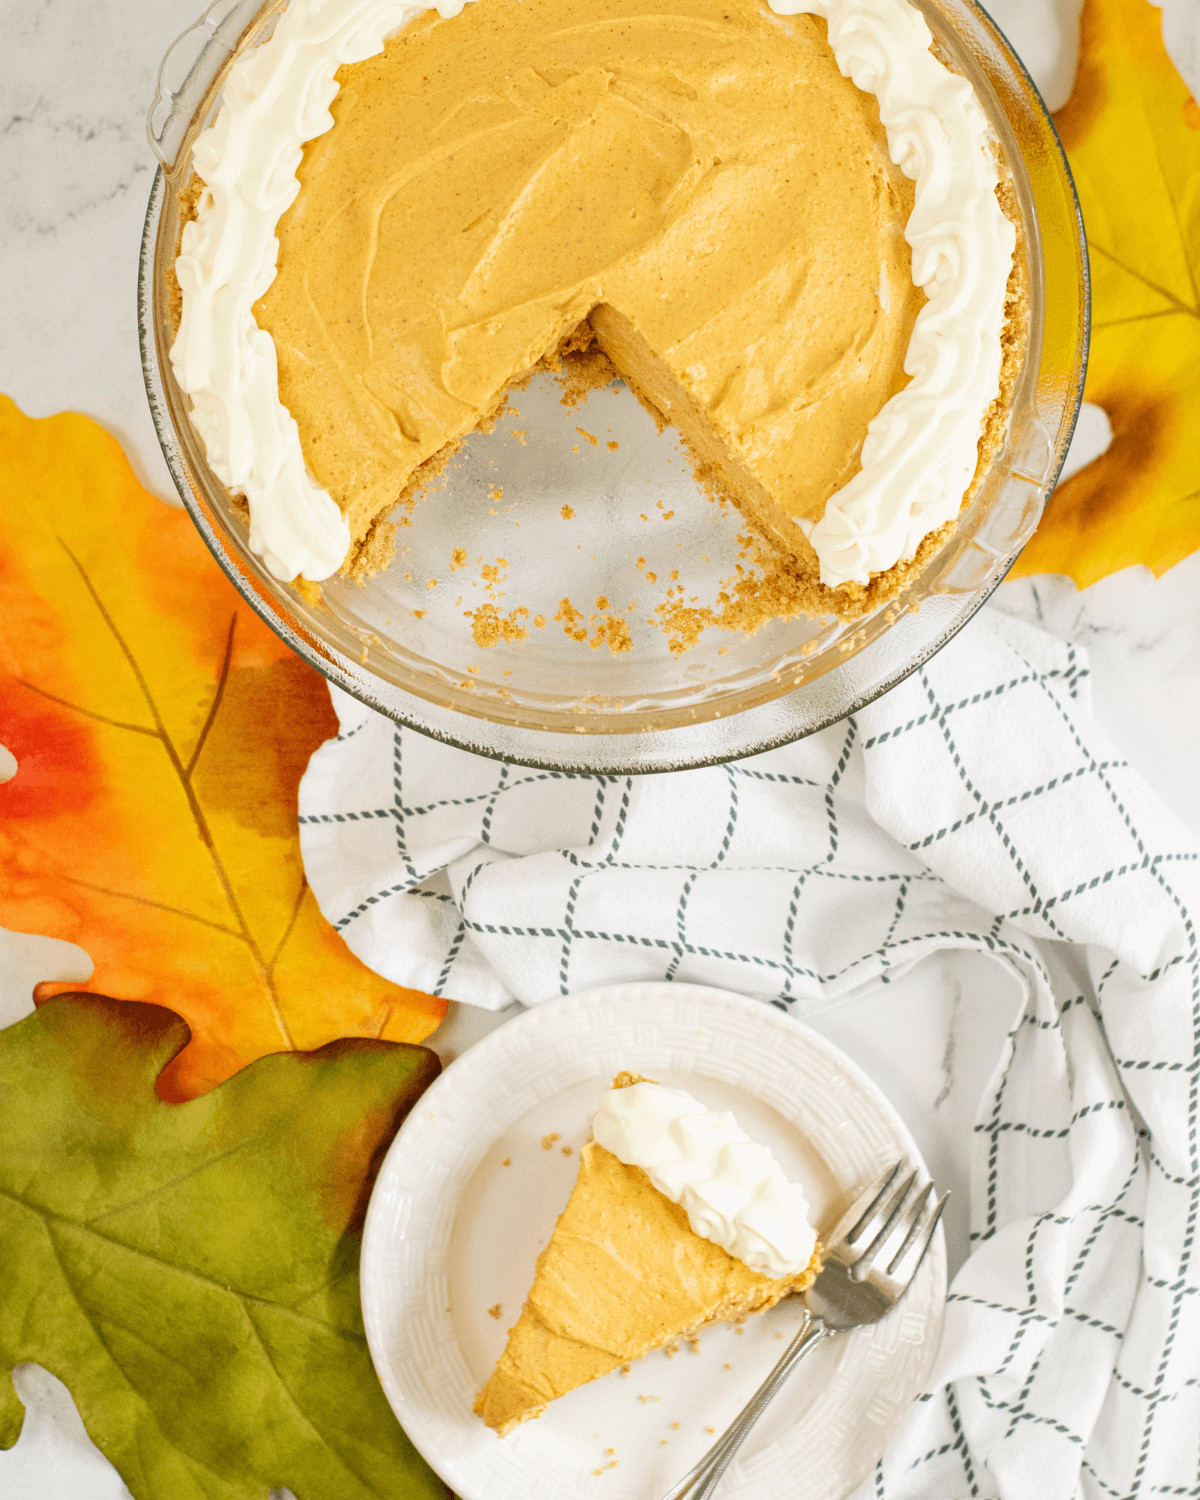 A decorated pumpkin pie with gingersnap crust.